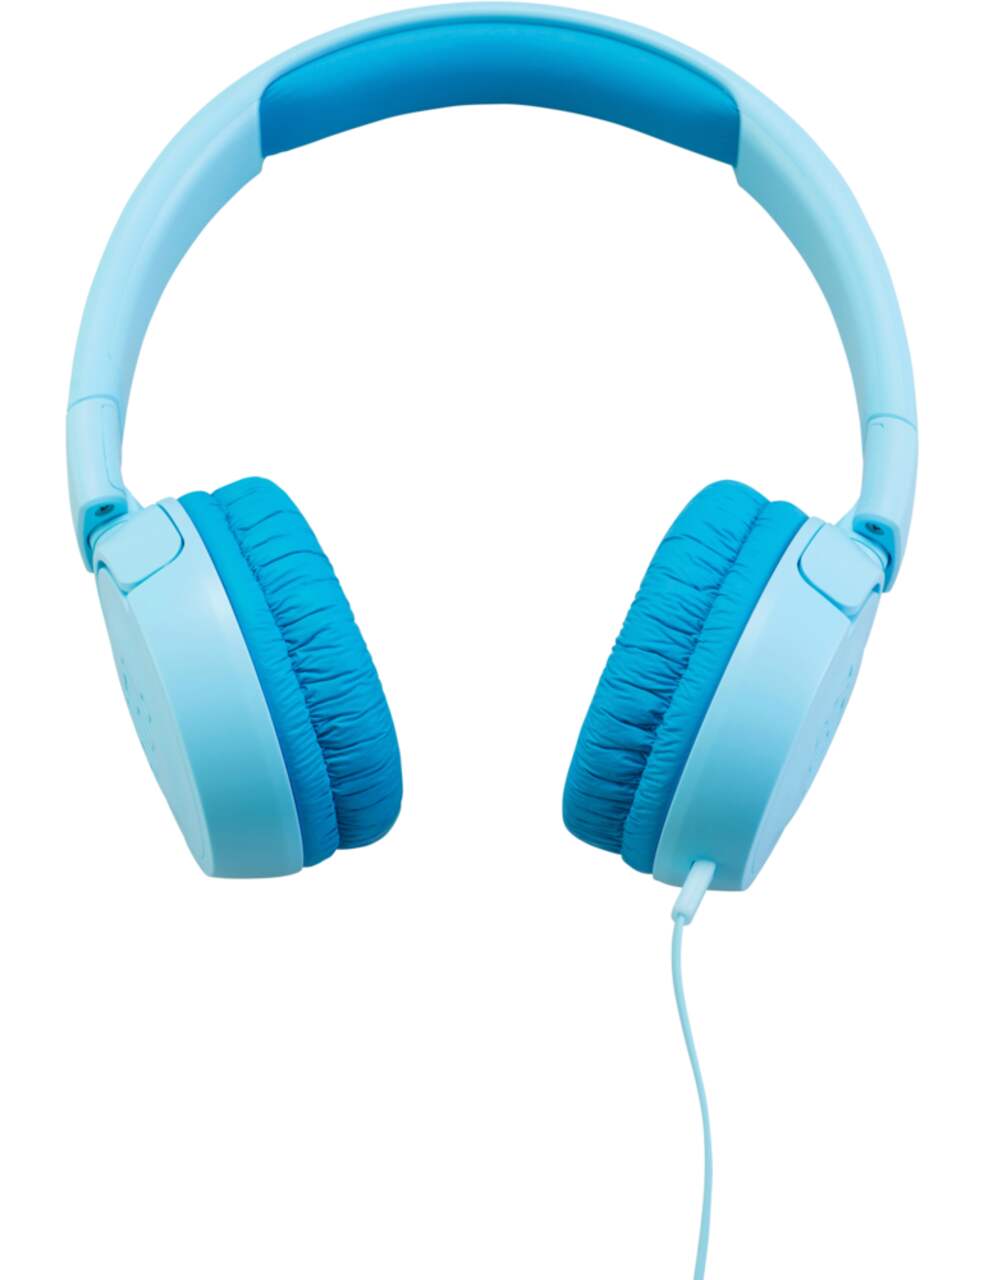 https://media-www.canadiantire.ca/product/living/electronics/home-entertainment-accessories/0744969/jbl-jr-300-headphones-blue-e0bd0b6b-5c11-4276-a672-554370366f3c.png?imdensity=1&imwidth=640&impolicy=mZoom